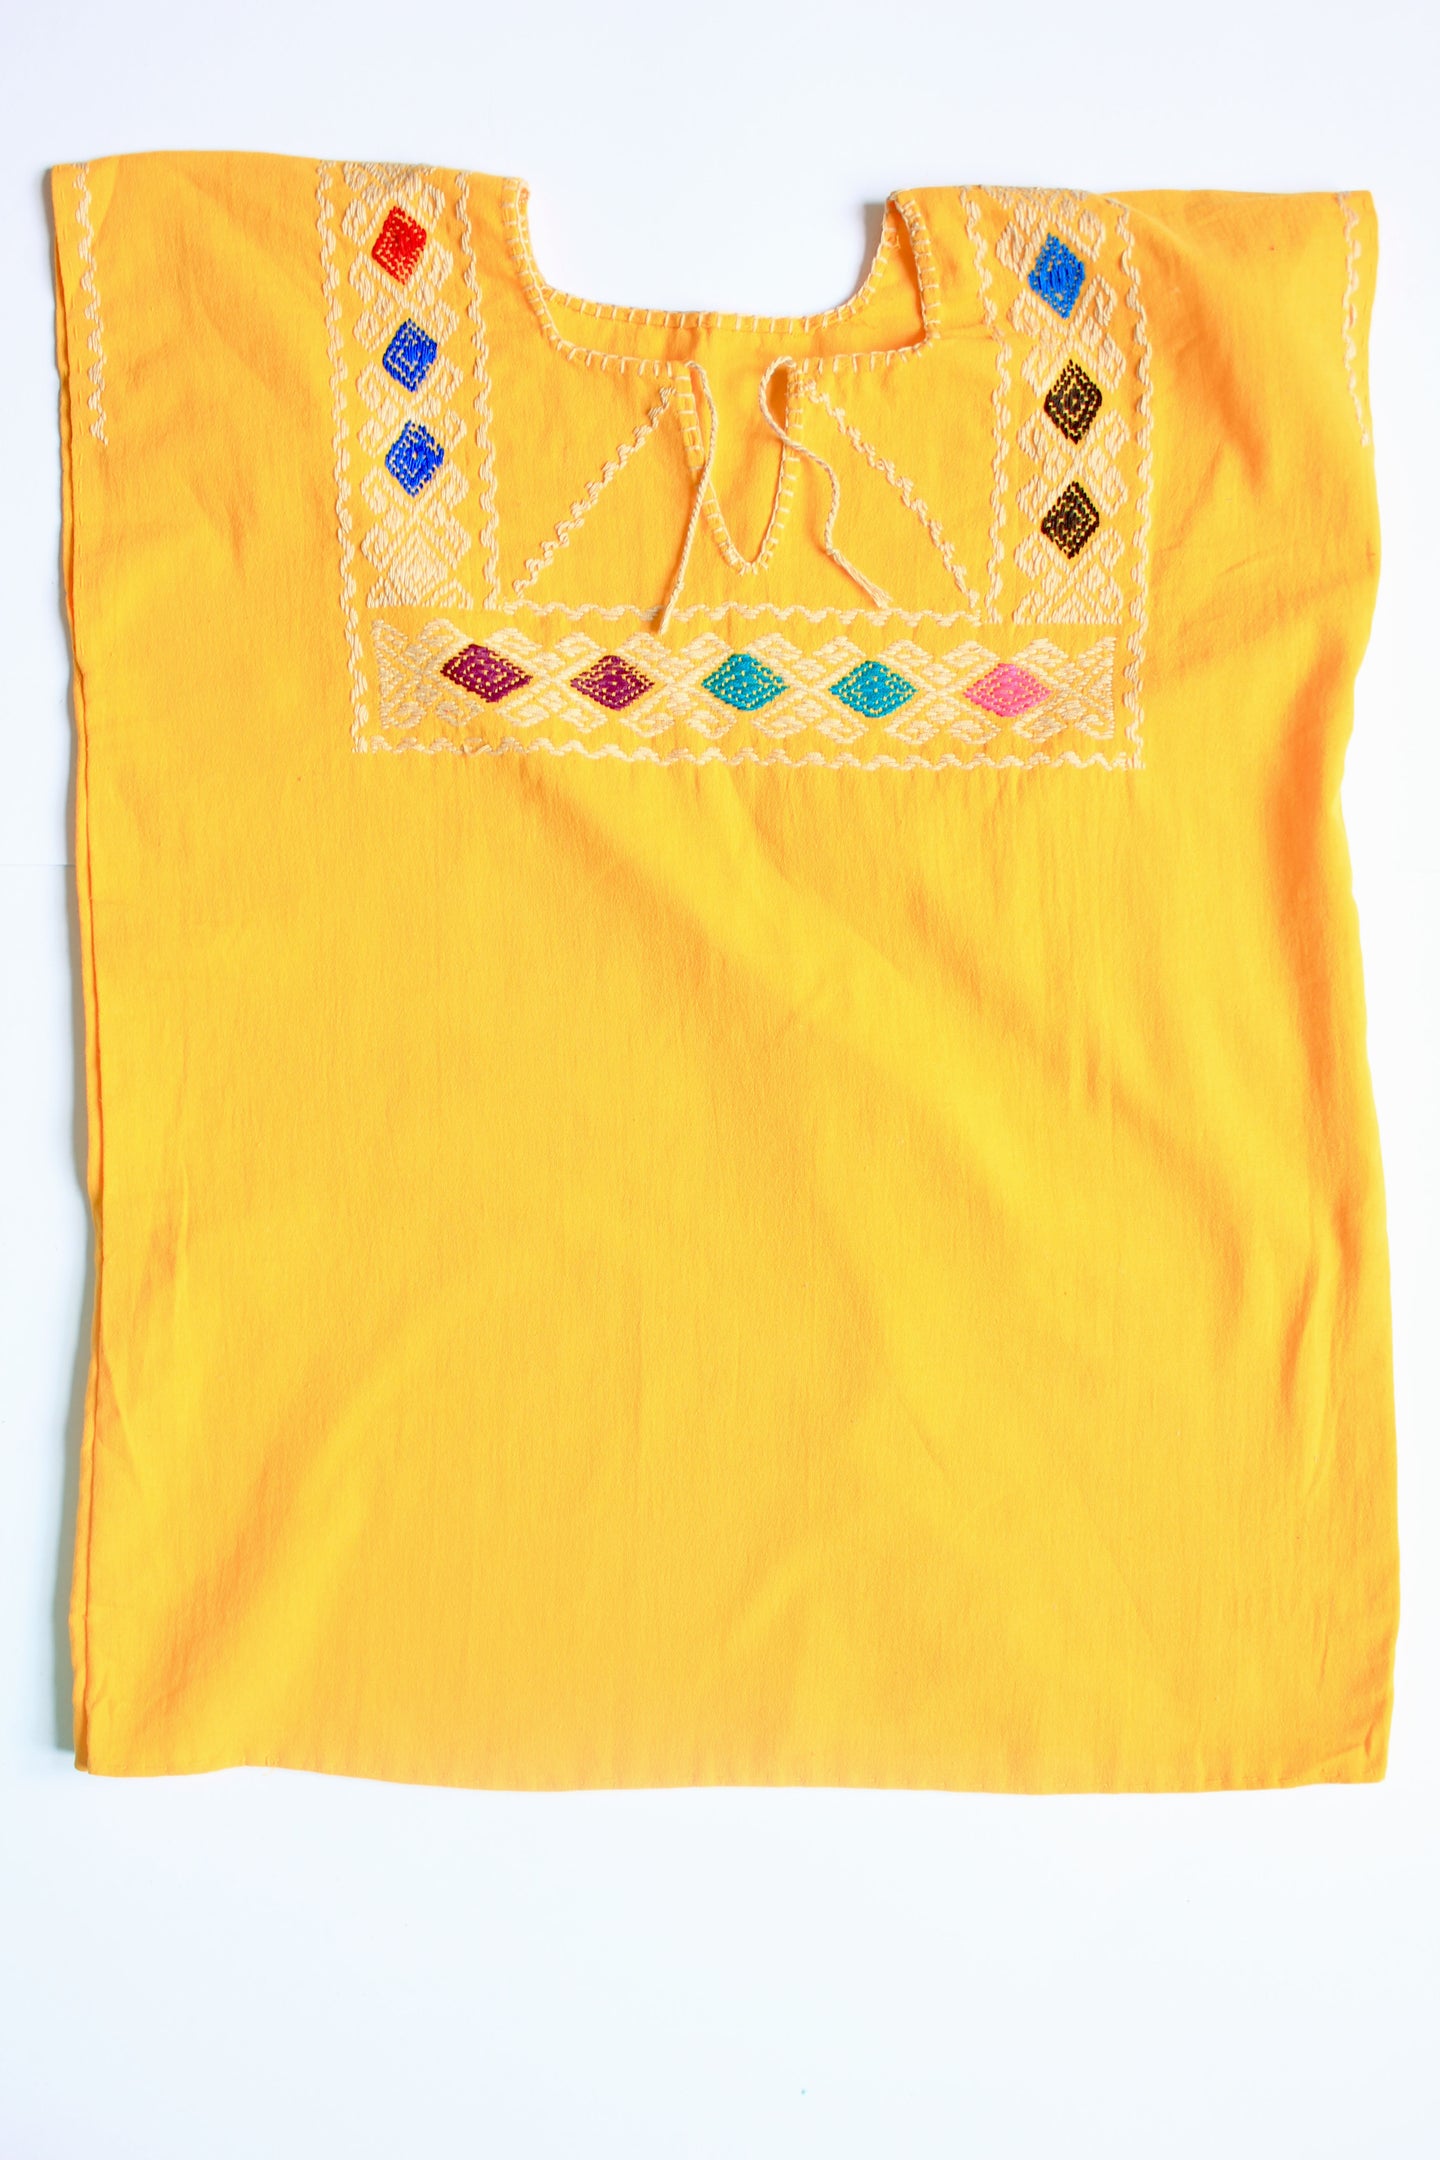 LM Sun Embroidered Mexican Top